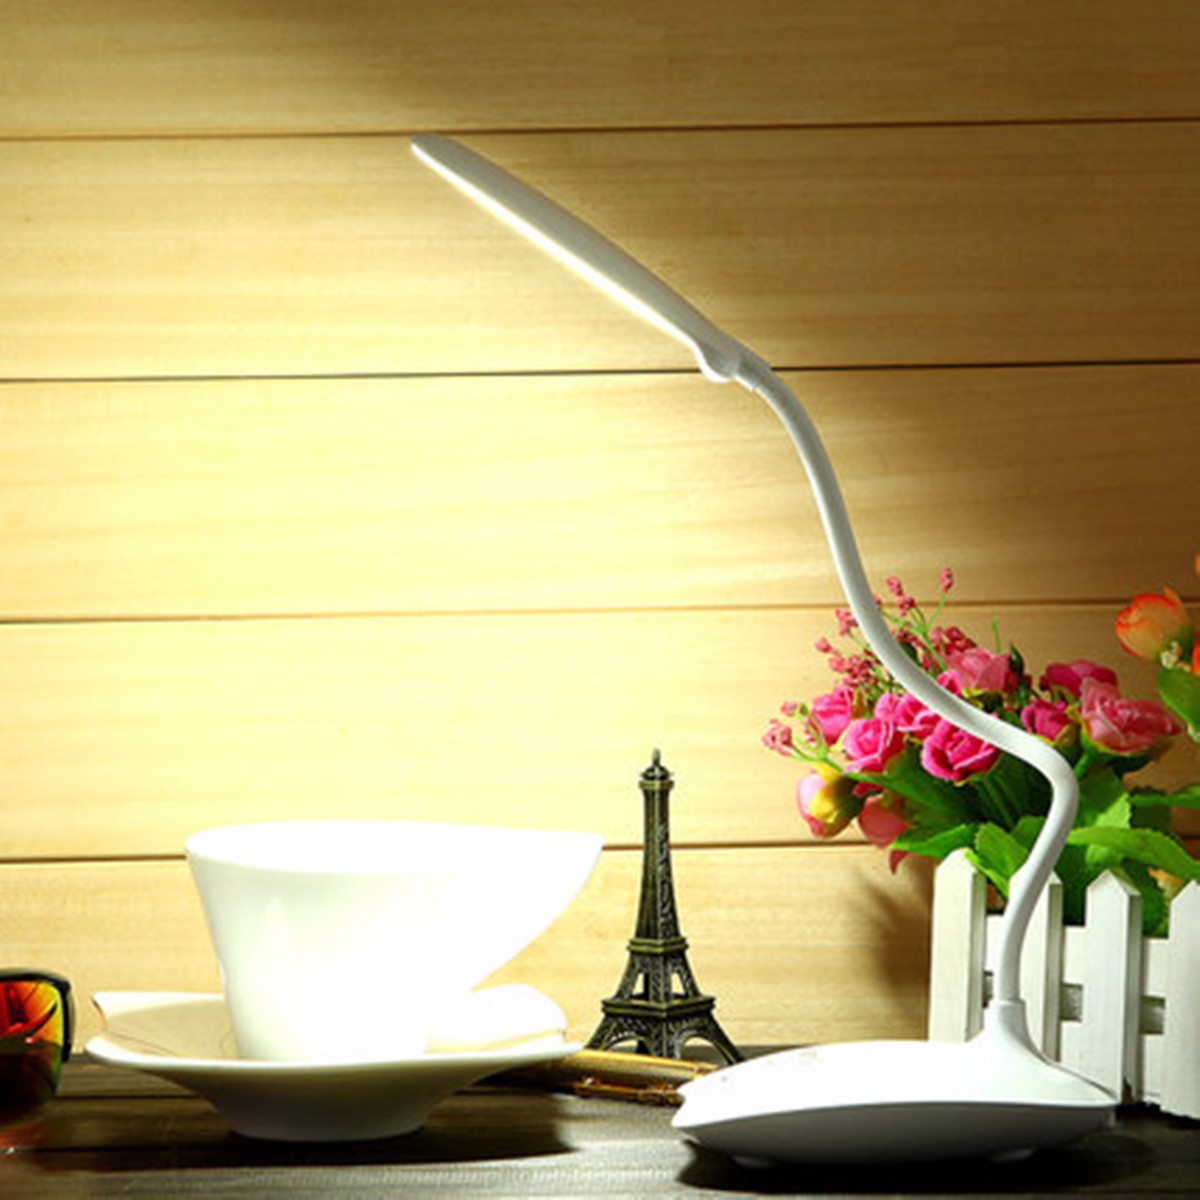 Flexible-Rechargeable-Dimmable-USB-LED-Night-Light-Bedside-Desktop-Reading-Table-Lamp-1118136